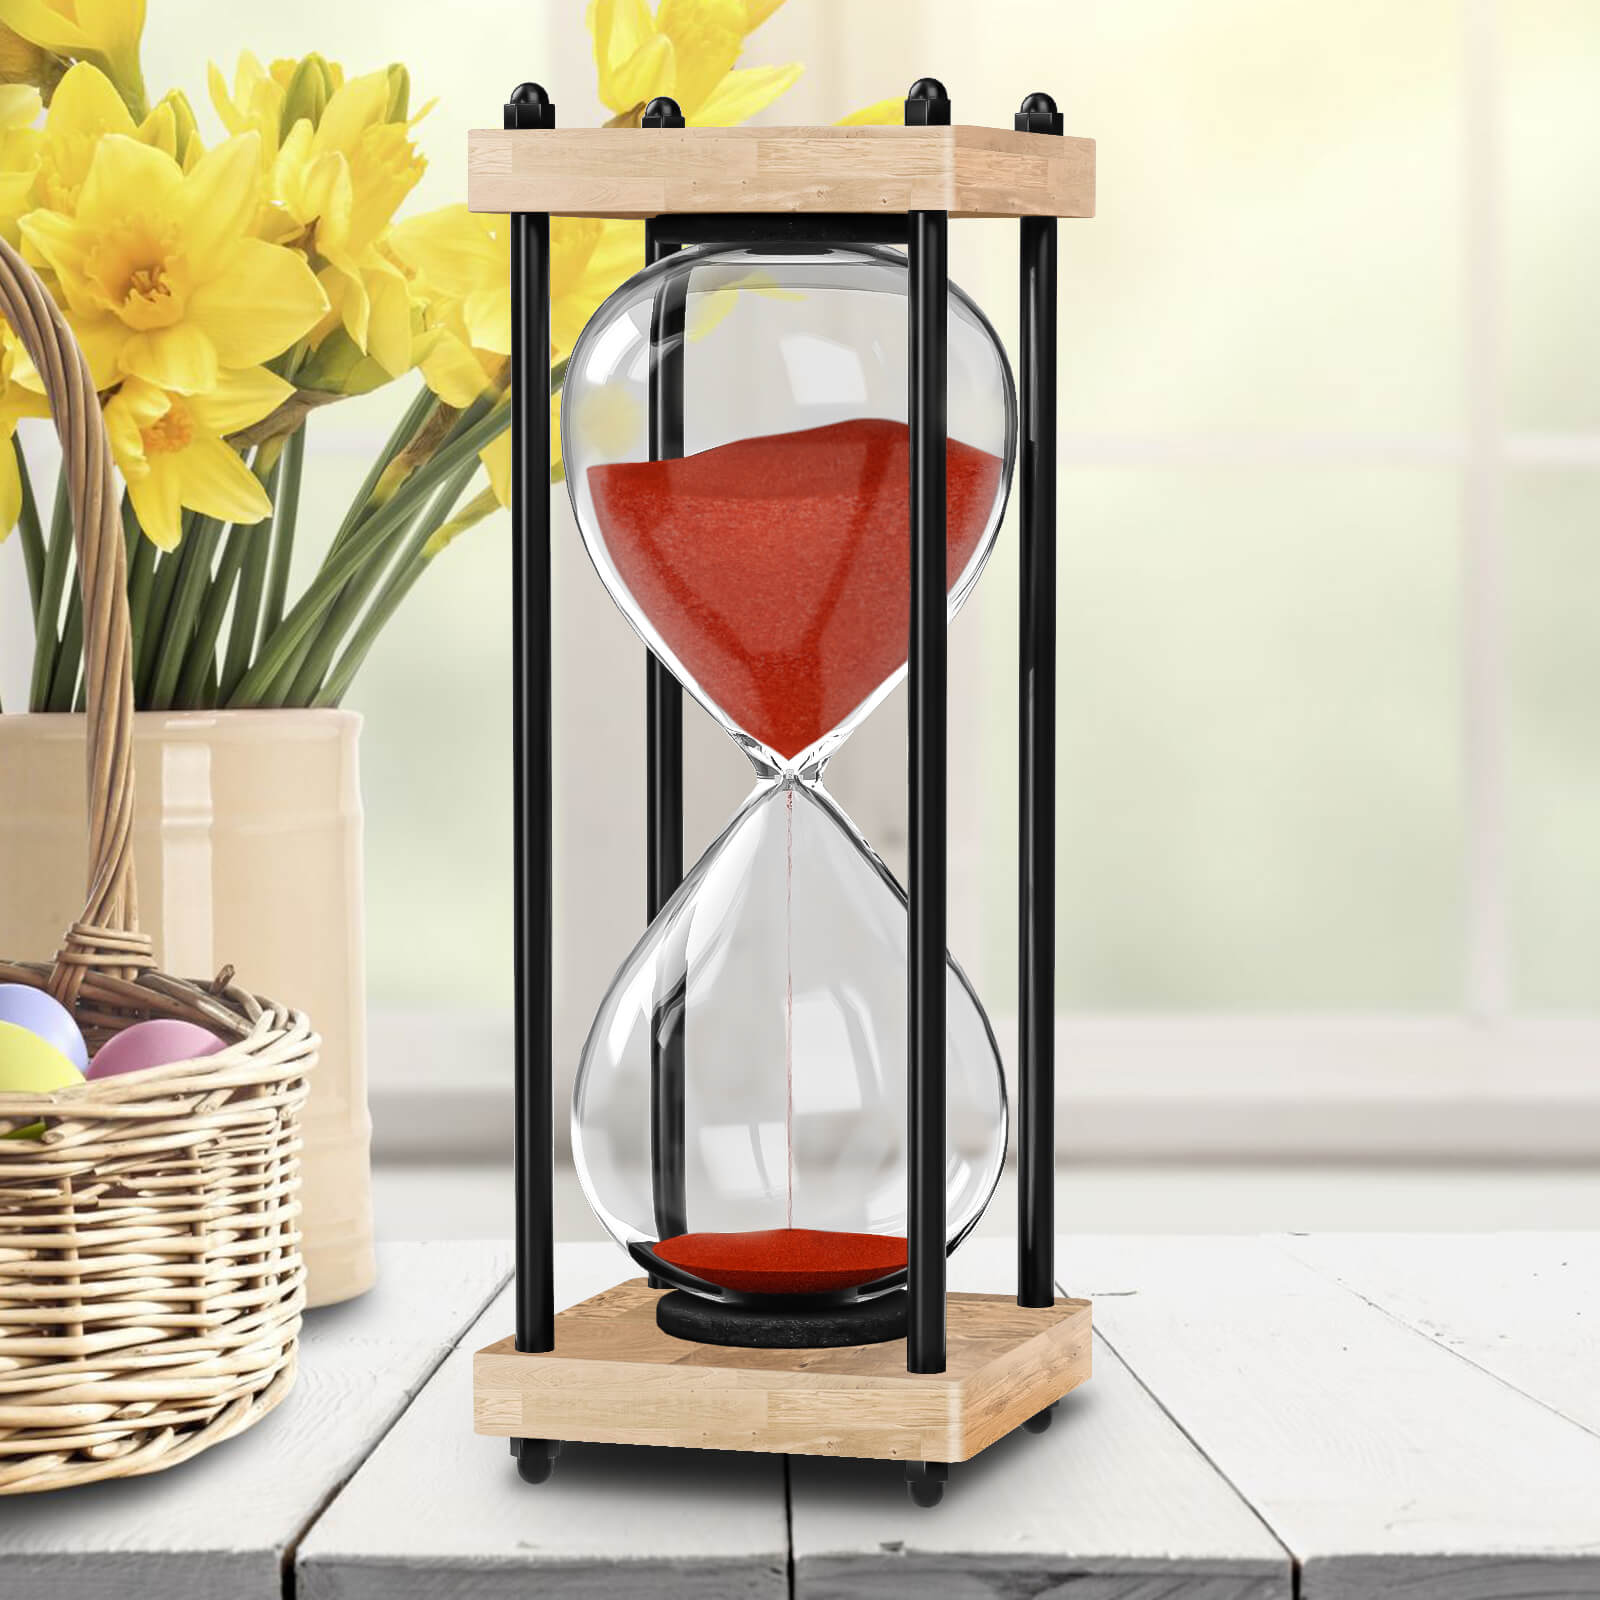 A Hourglass Sand Timer Makes Life Different